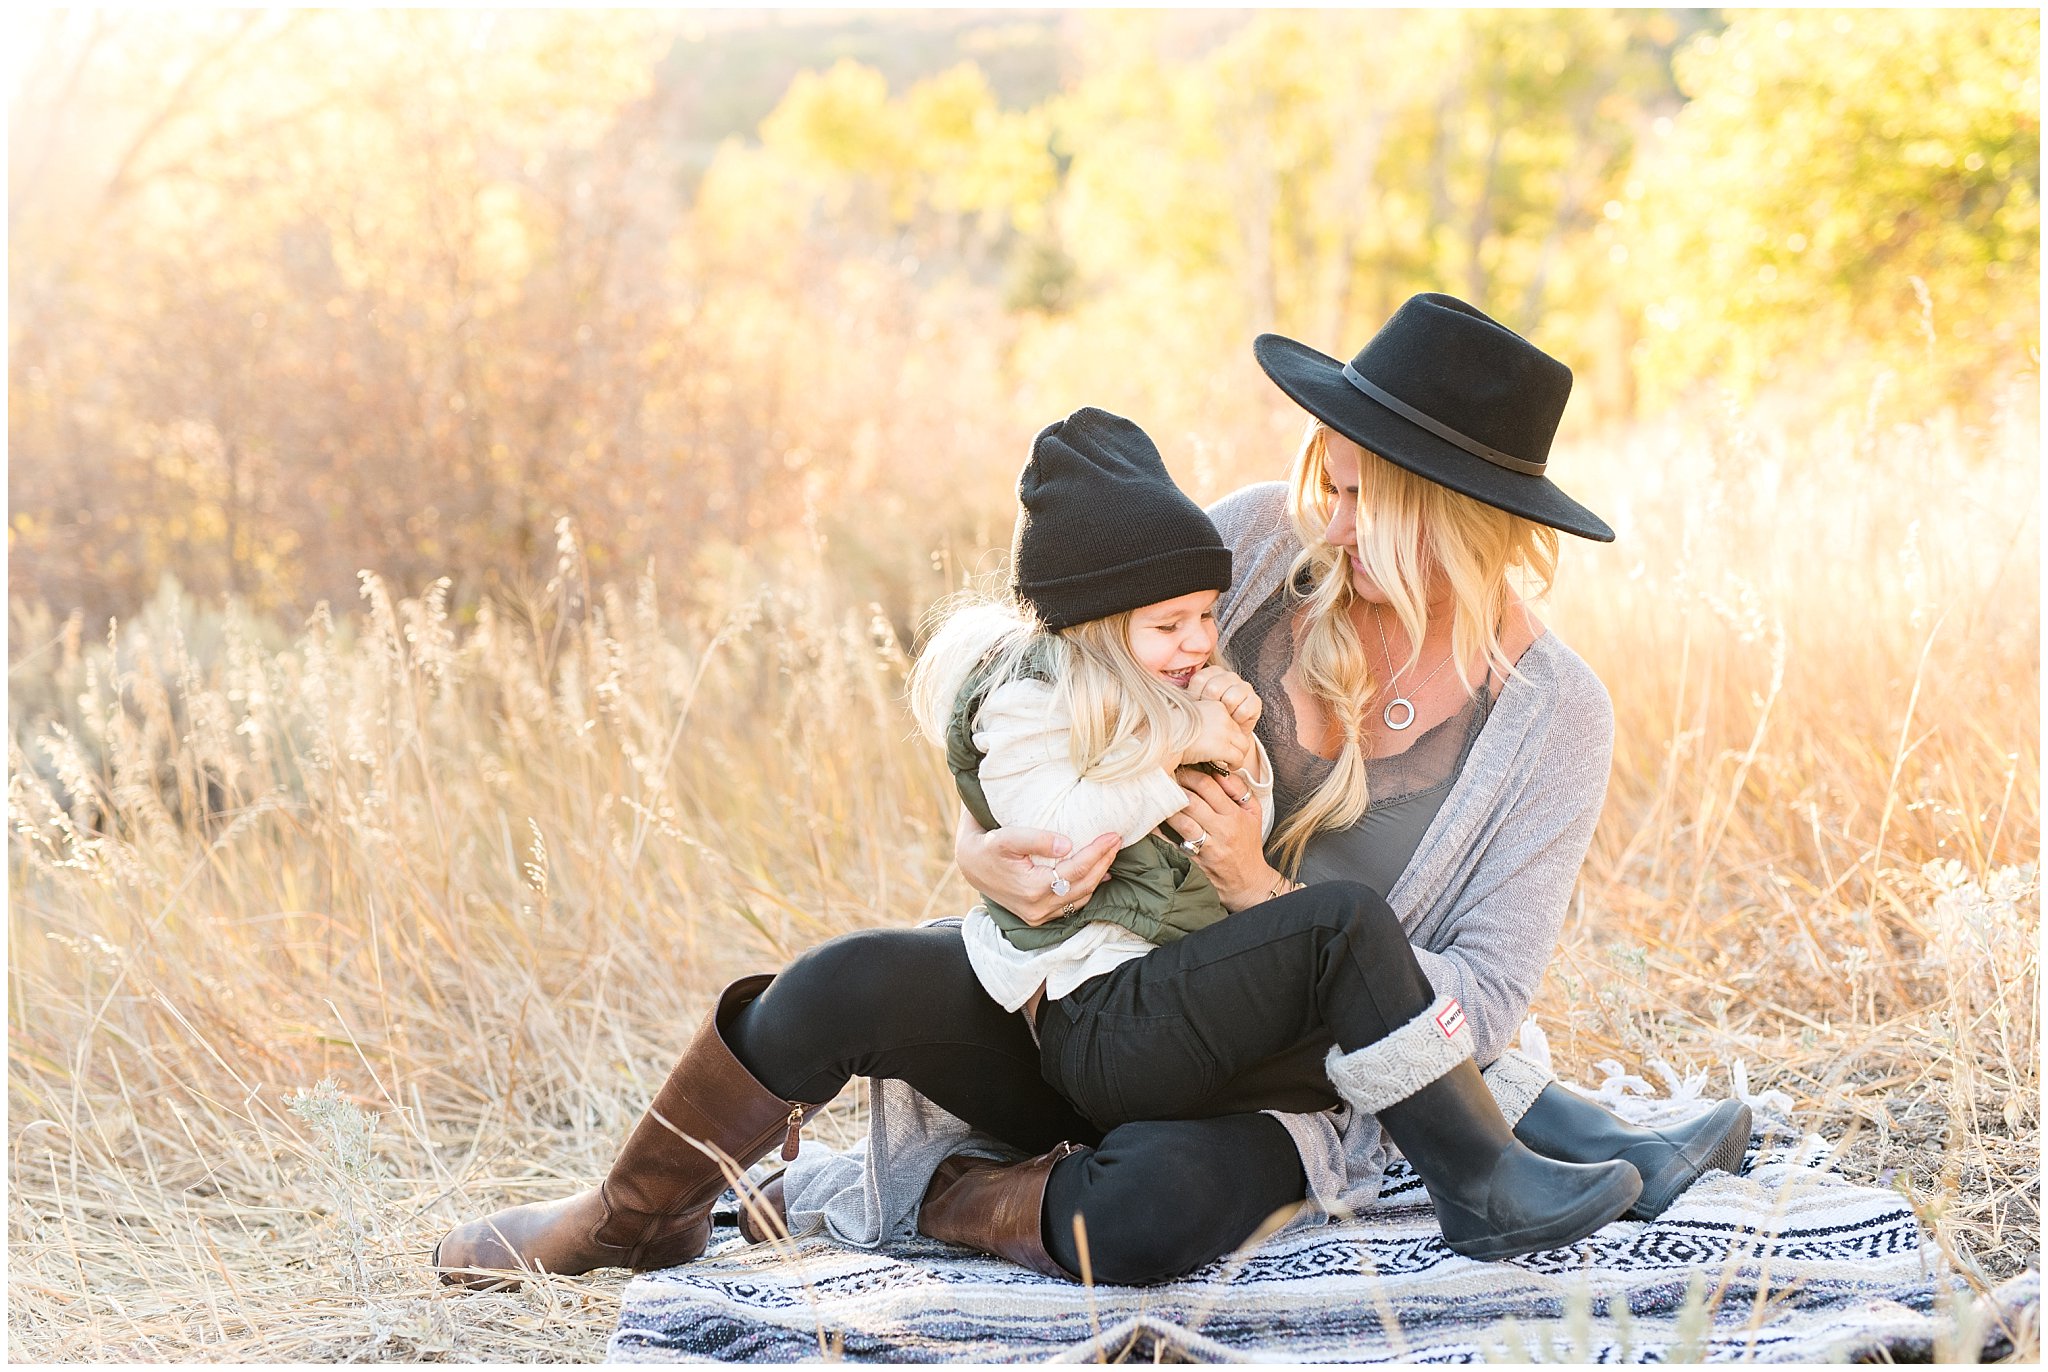 Mom tickling son during fall family pictures | Fall Family Pictures in the Mountains | Snowbasin, Utah | Jessie and Dallin